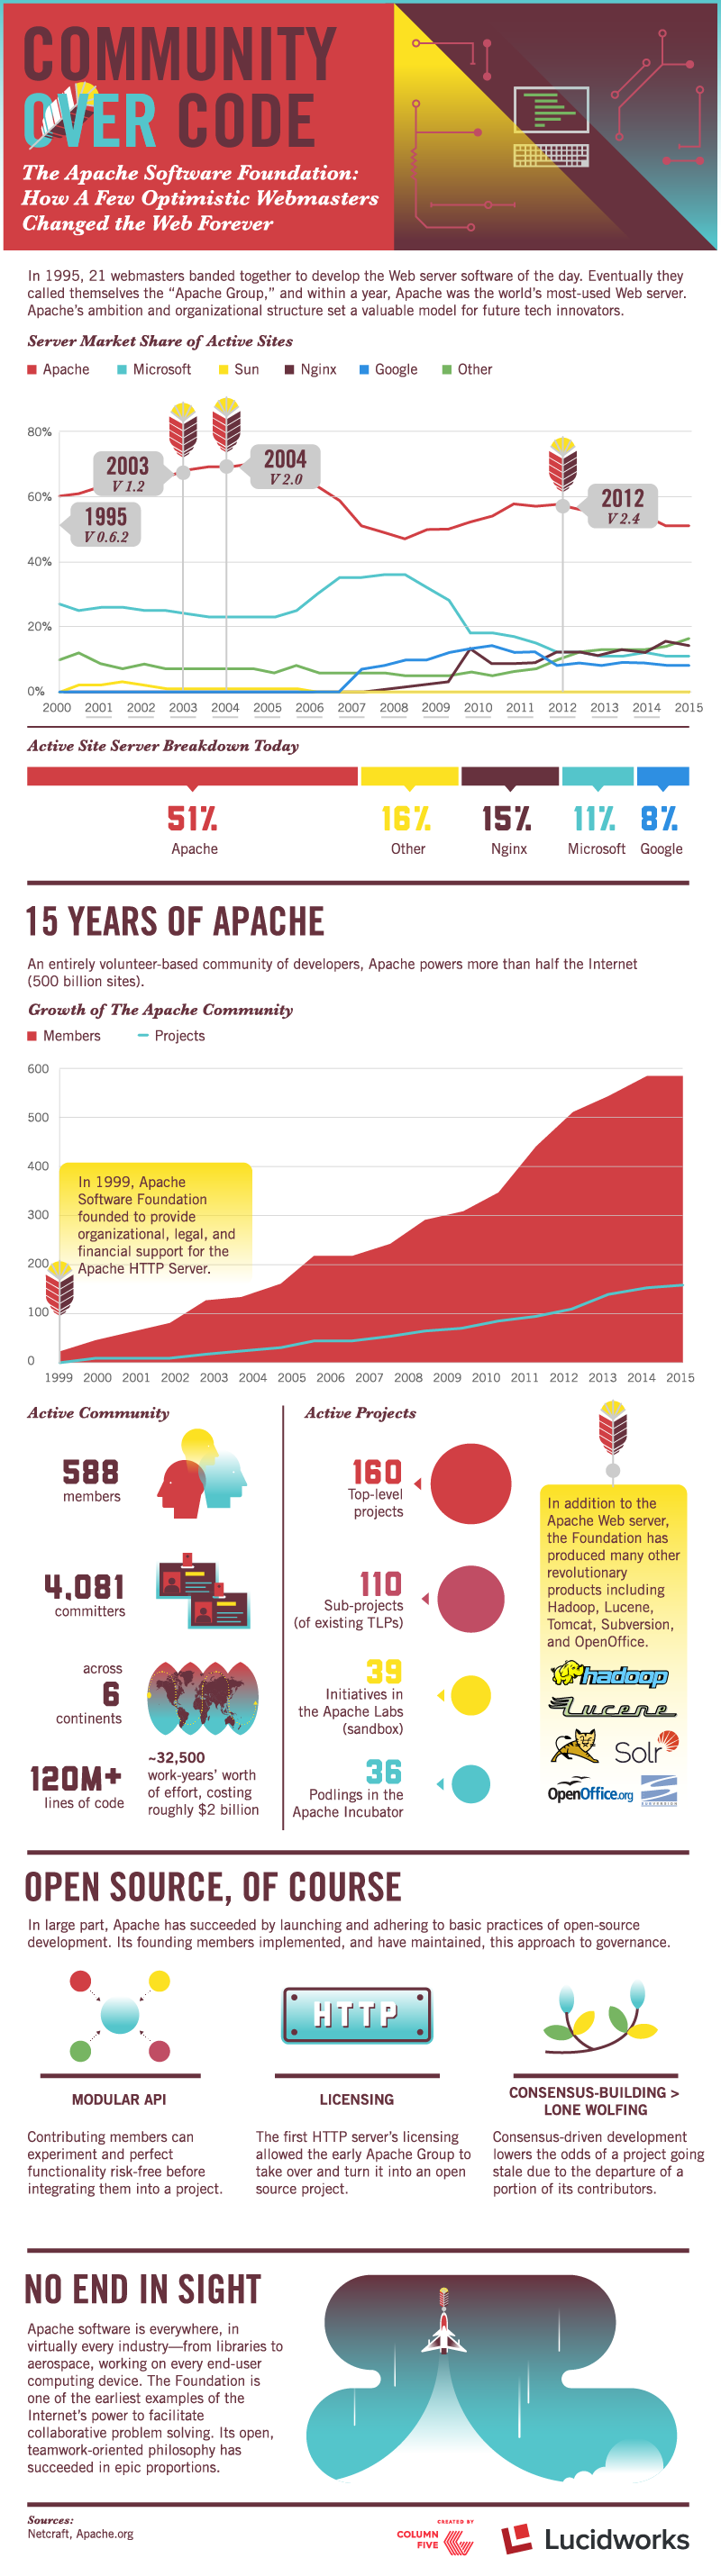 Lucidworks_Apache_History_Infographic